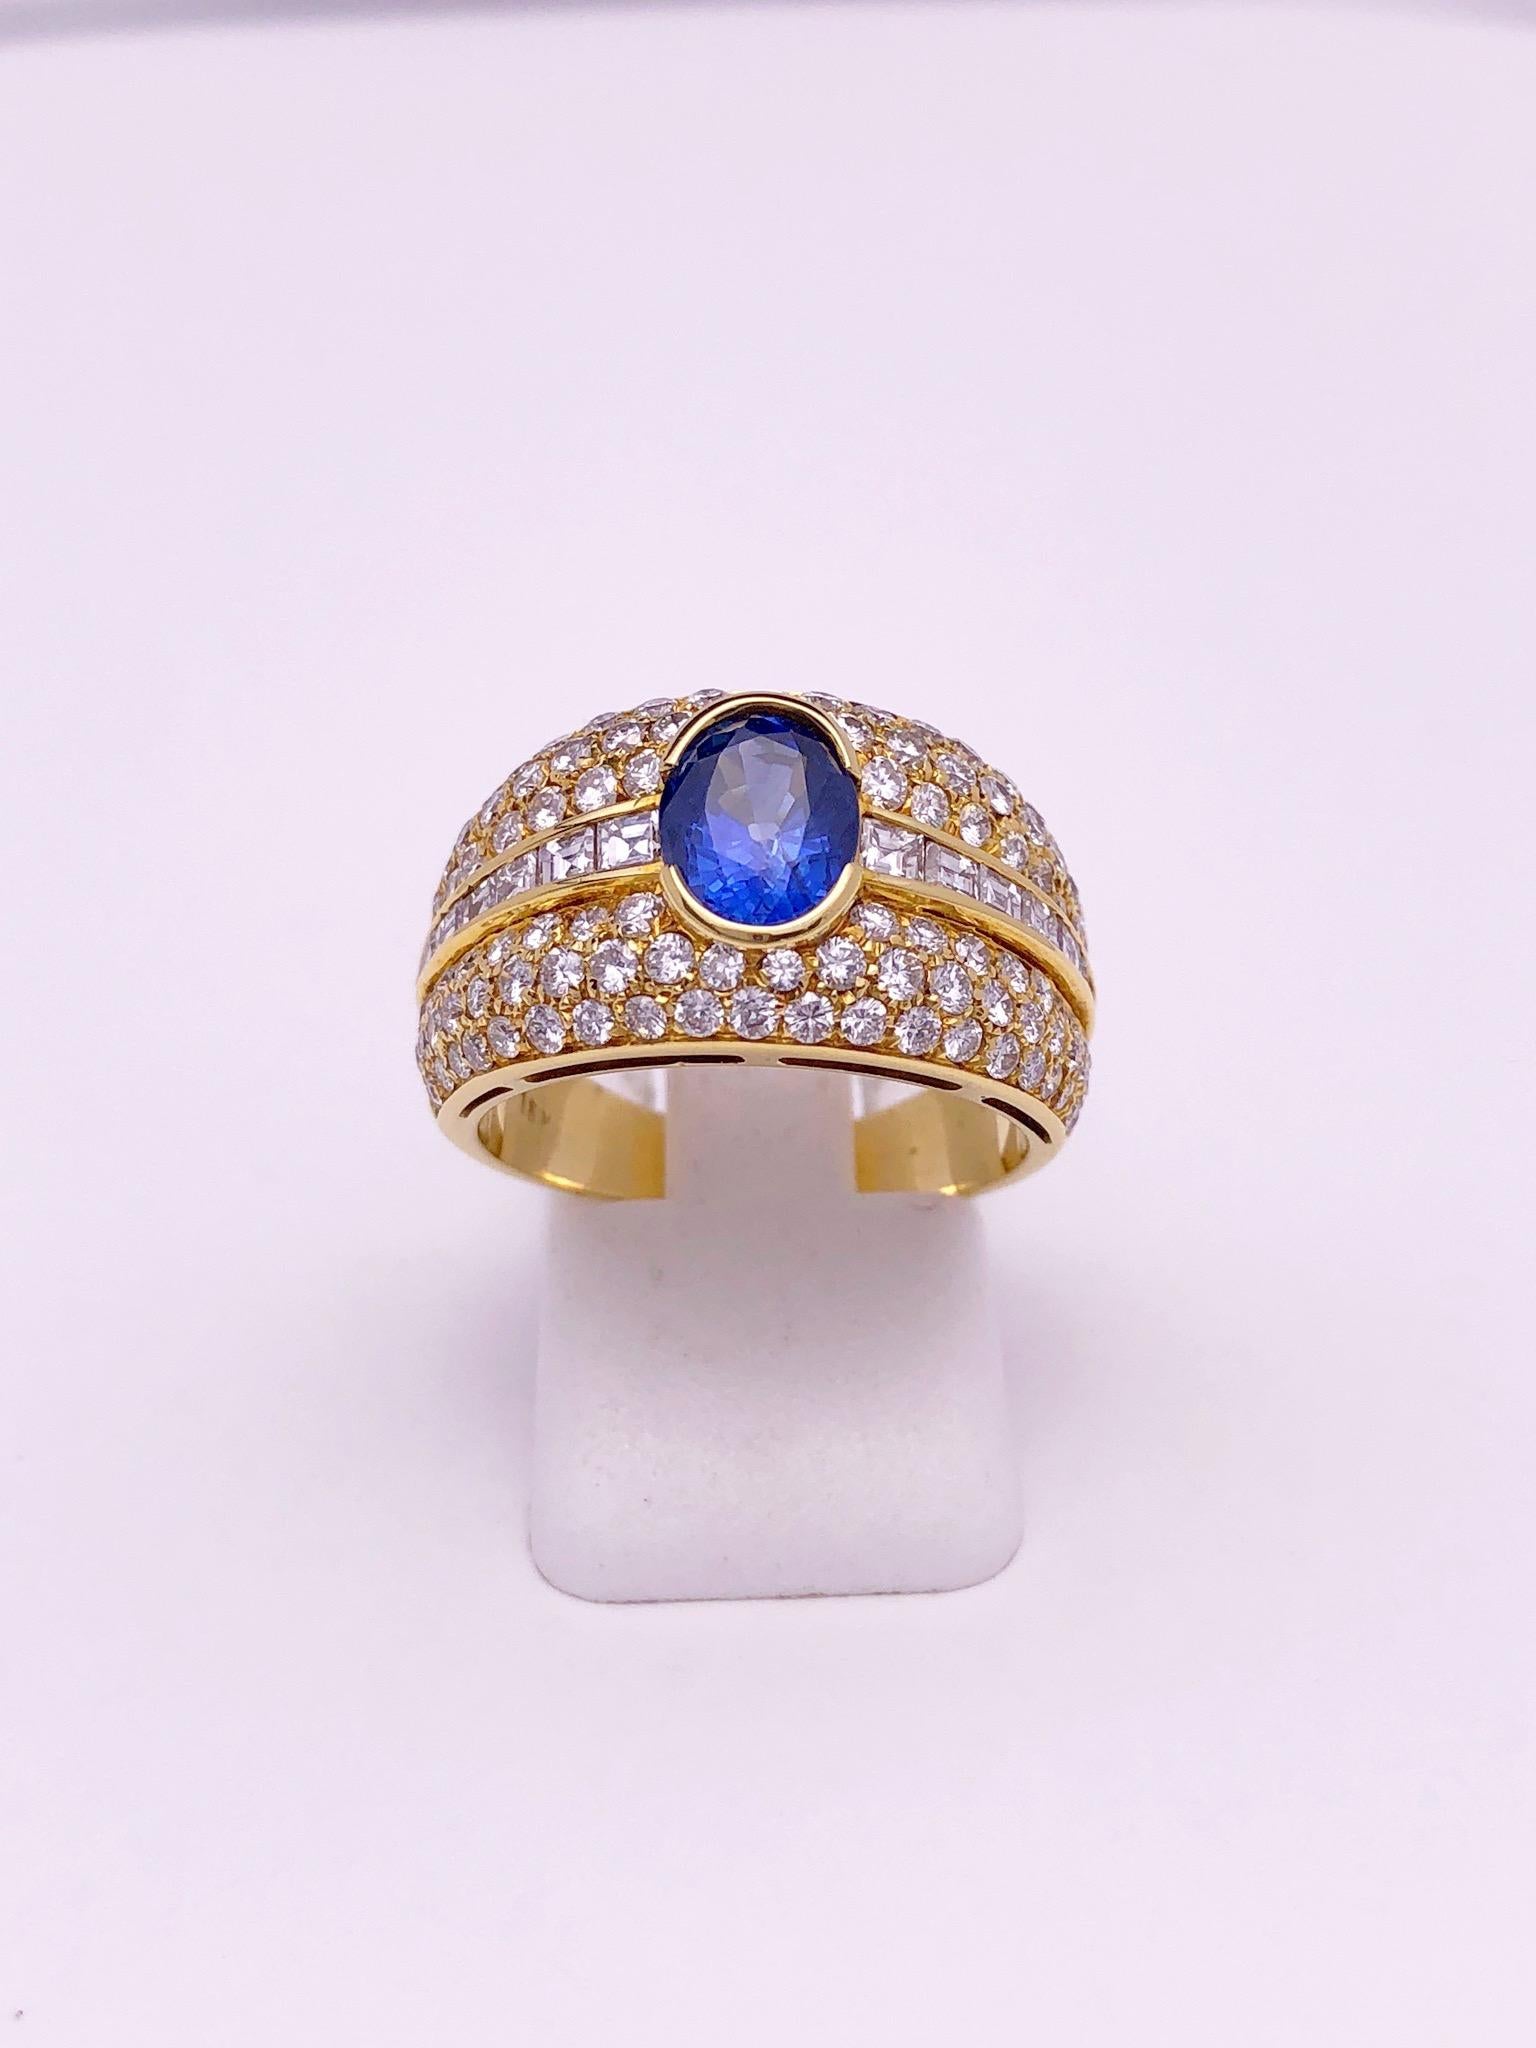 Contemporary 18 Karat Yellow Gold Diamond Ring with 1.47 Carat Oval Blue Sapphire Center For Sale